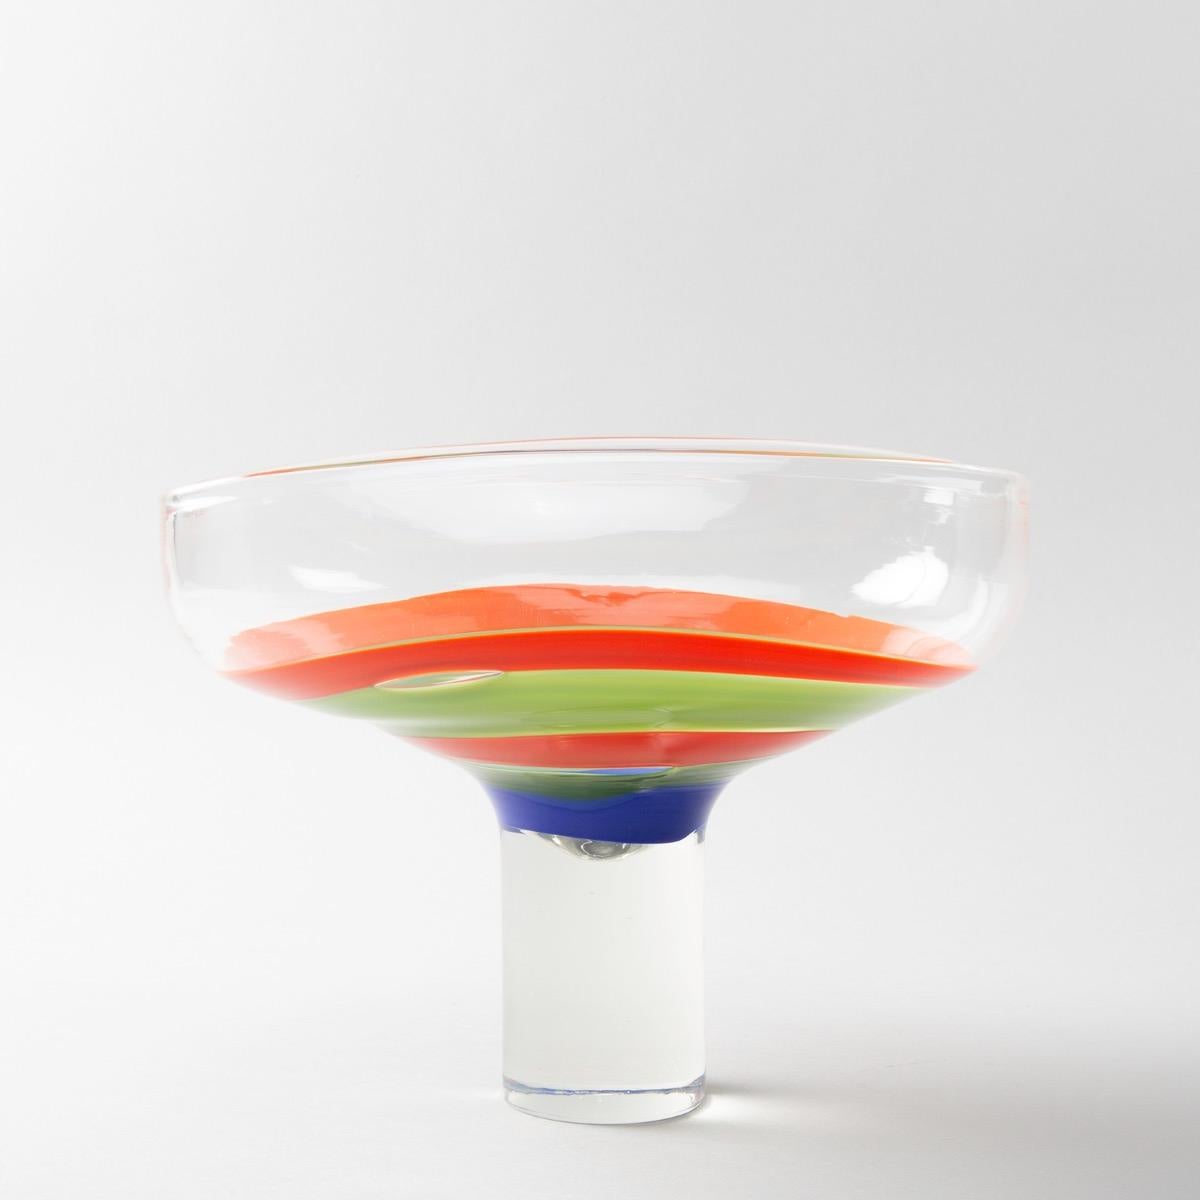 A rare large cup designed for Philips, circa 1968-1970 by Ludovico Diaz de Santillana.
A rectangular cup on a cylindrical high foot.
The centre decorated with concentric bands of orange, blue and green glass.
This designed ordered by the company